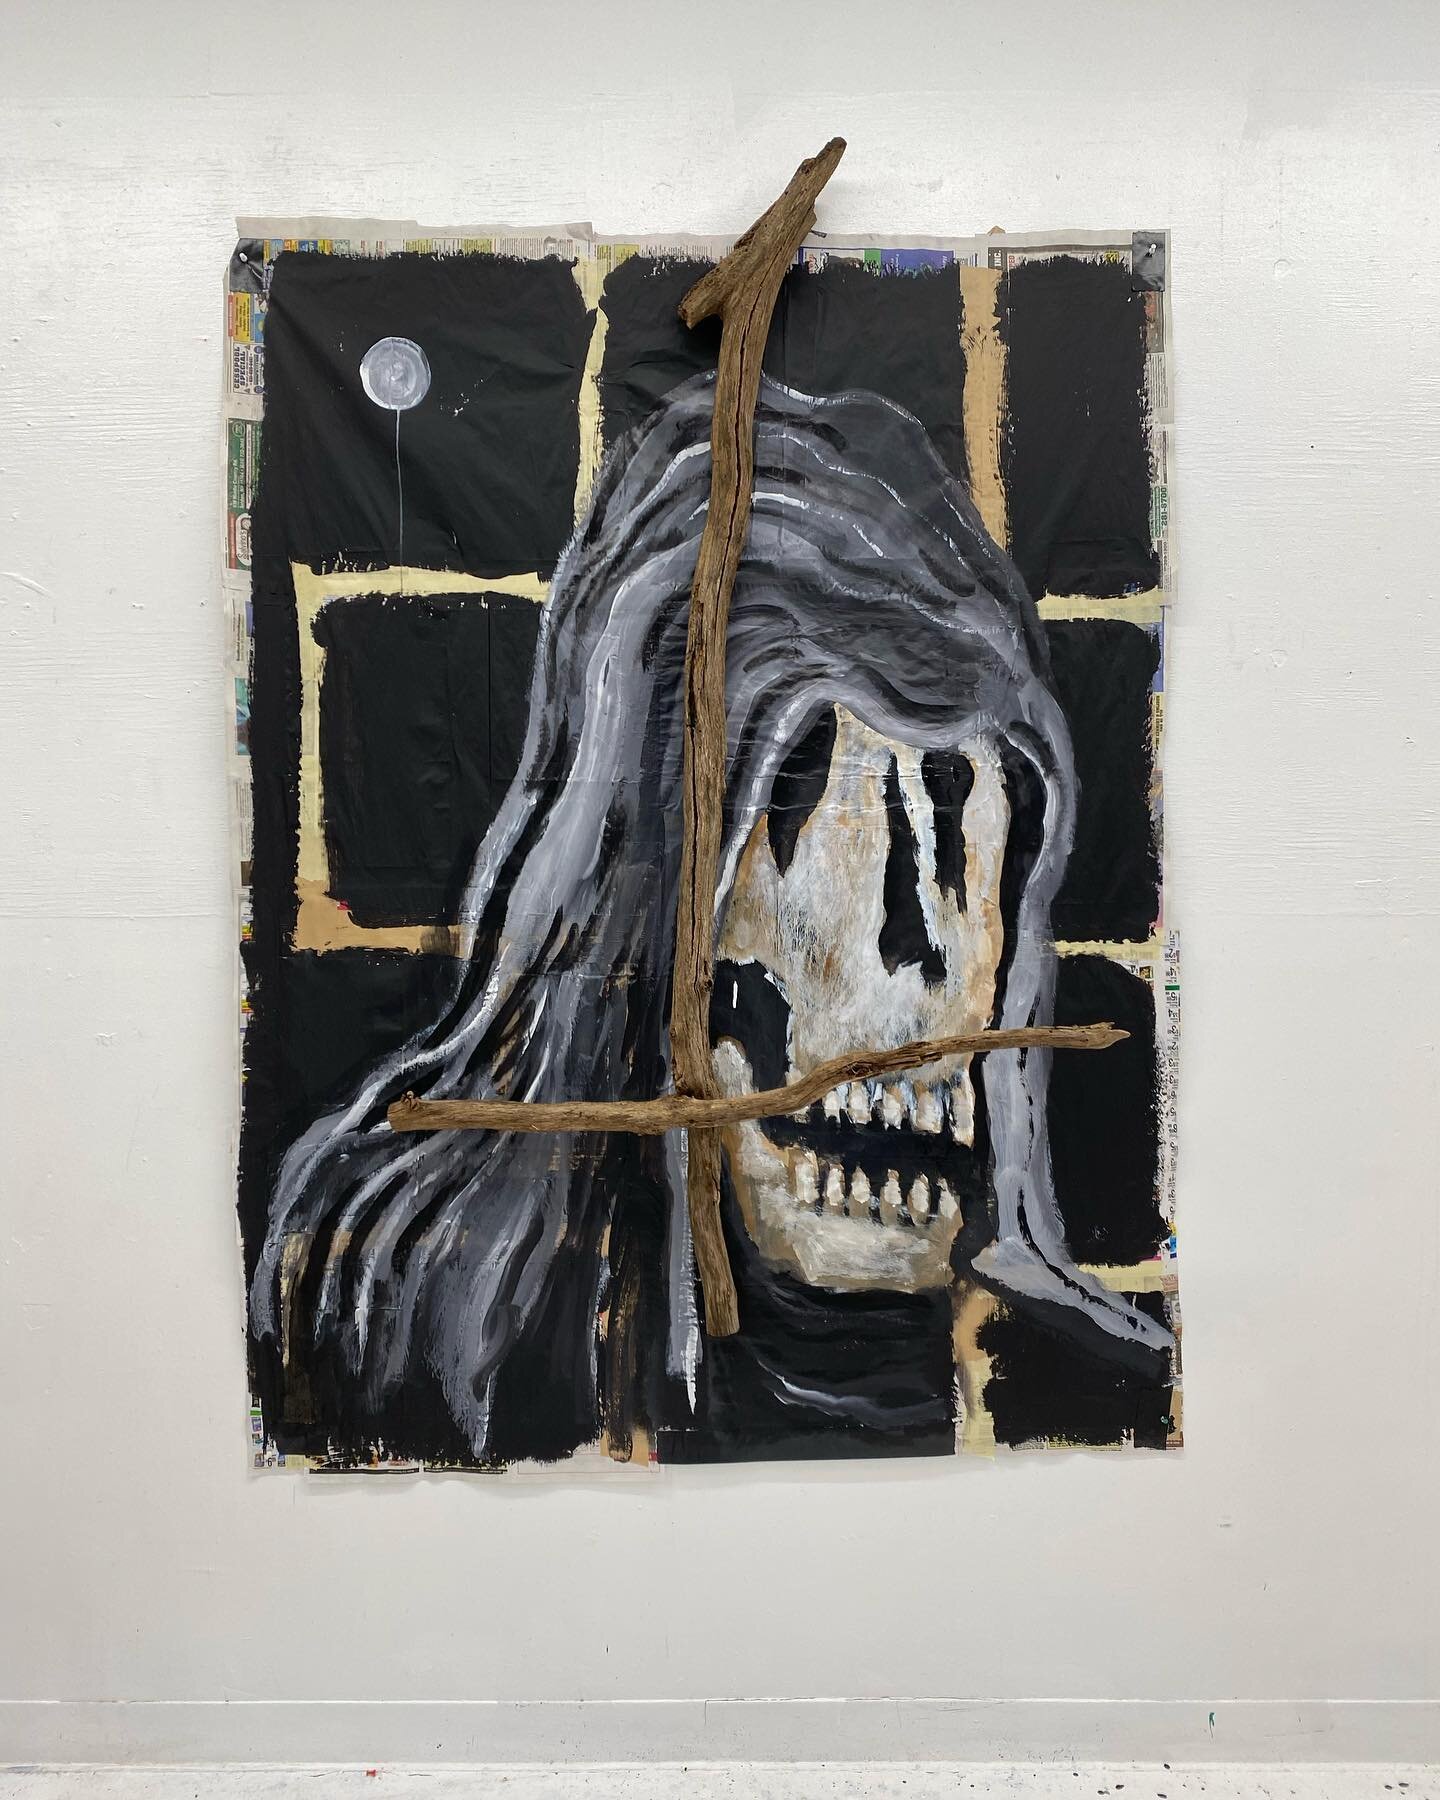 Don&rsquo;t Freak Out&hellip; 55&rdquo;x72&rdquo; - acrylic and tempera on wood news paper and tape 
.
..
&hellip;.
#jamesgreco #contemporaryart #contemporarypainting #reeper #dontfreakout #artcollector #installationart #studiopractice #assemblage #w